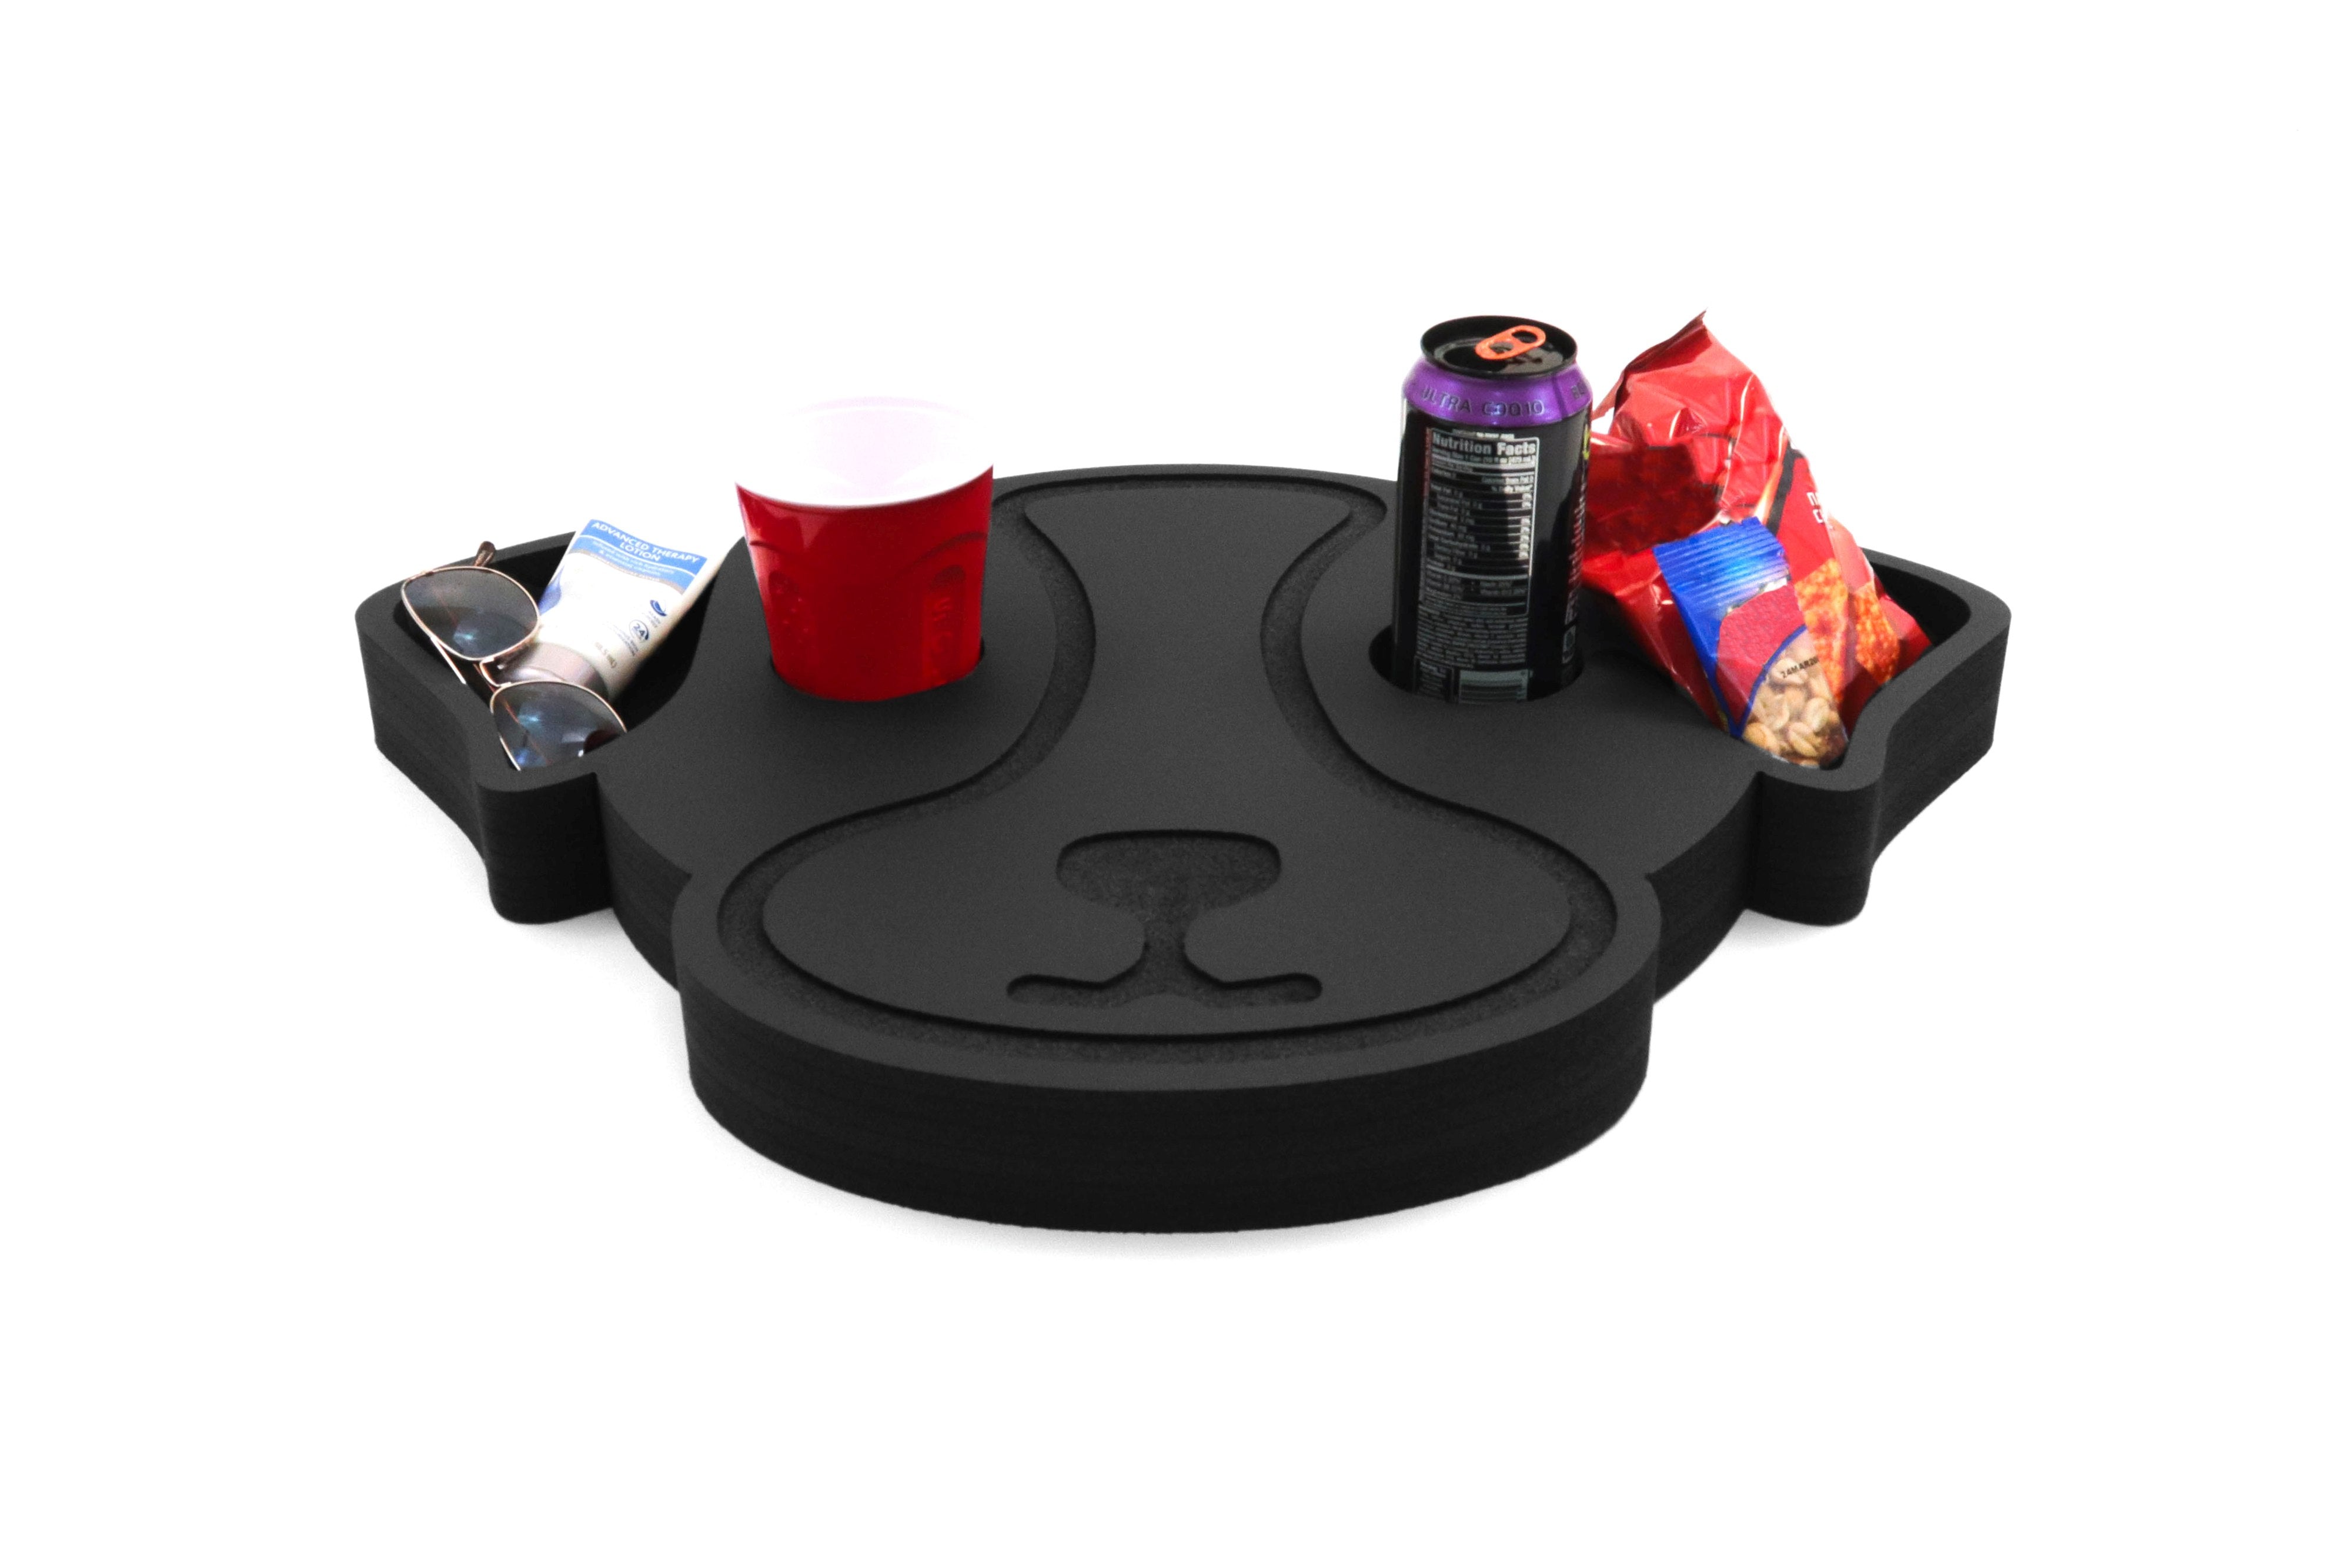 Dog Shaped Drink Holder Floating Refreshment Table Tray for Pool or Beach Party Float Lounge Durable Foam 4 Compartment with Cup Holders 2 Feet